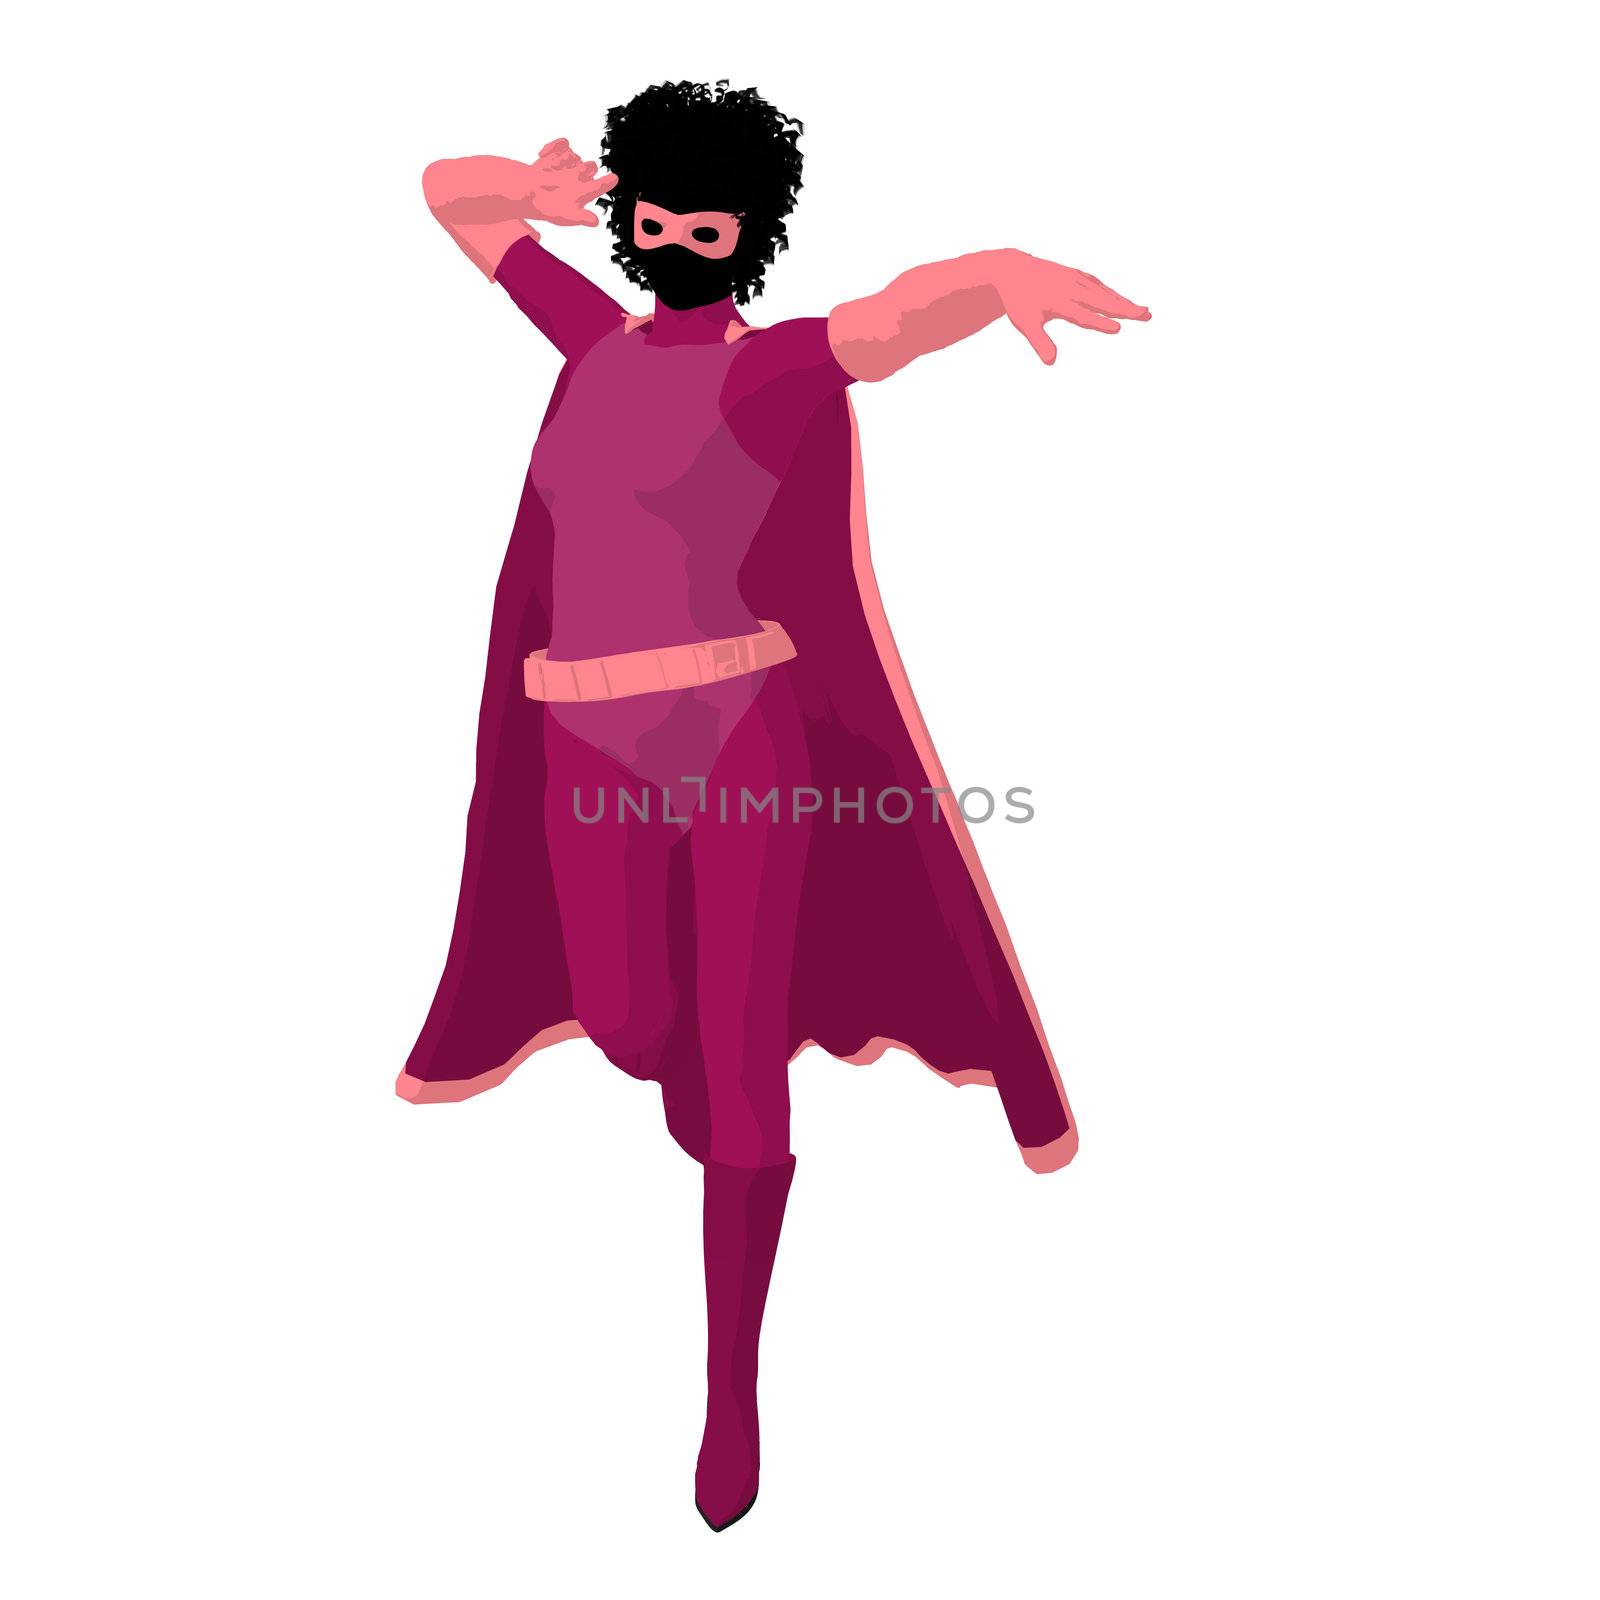 African american super heroine silhouette on a white background